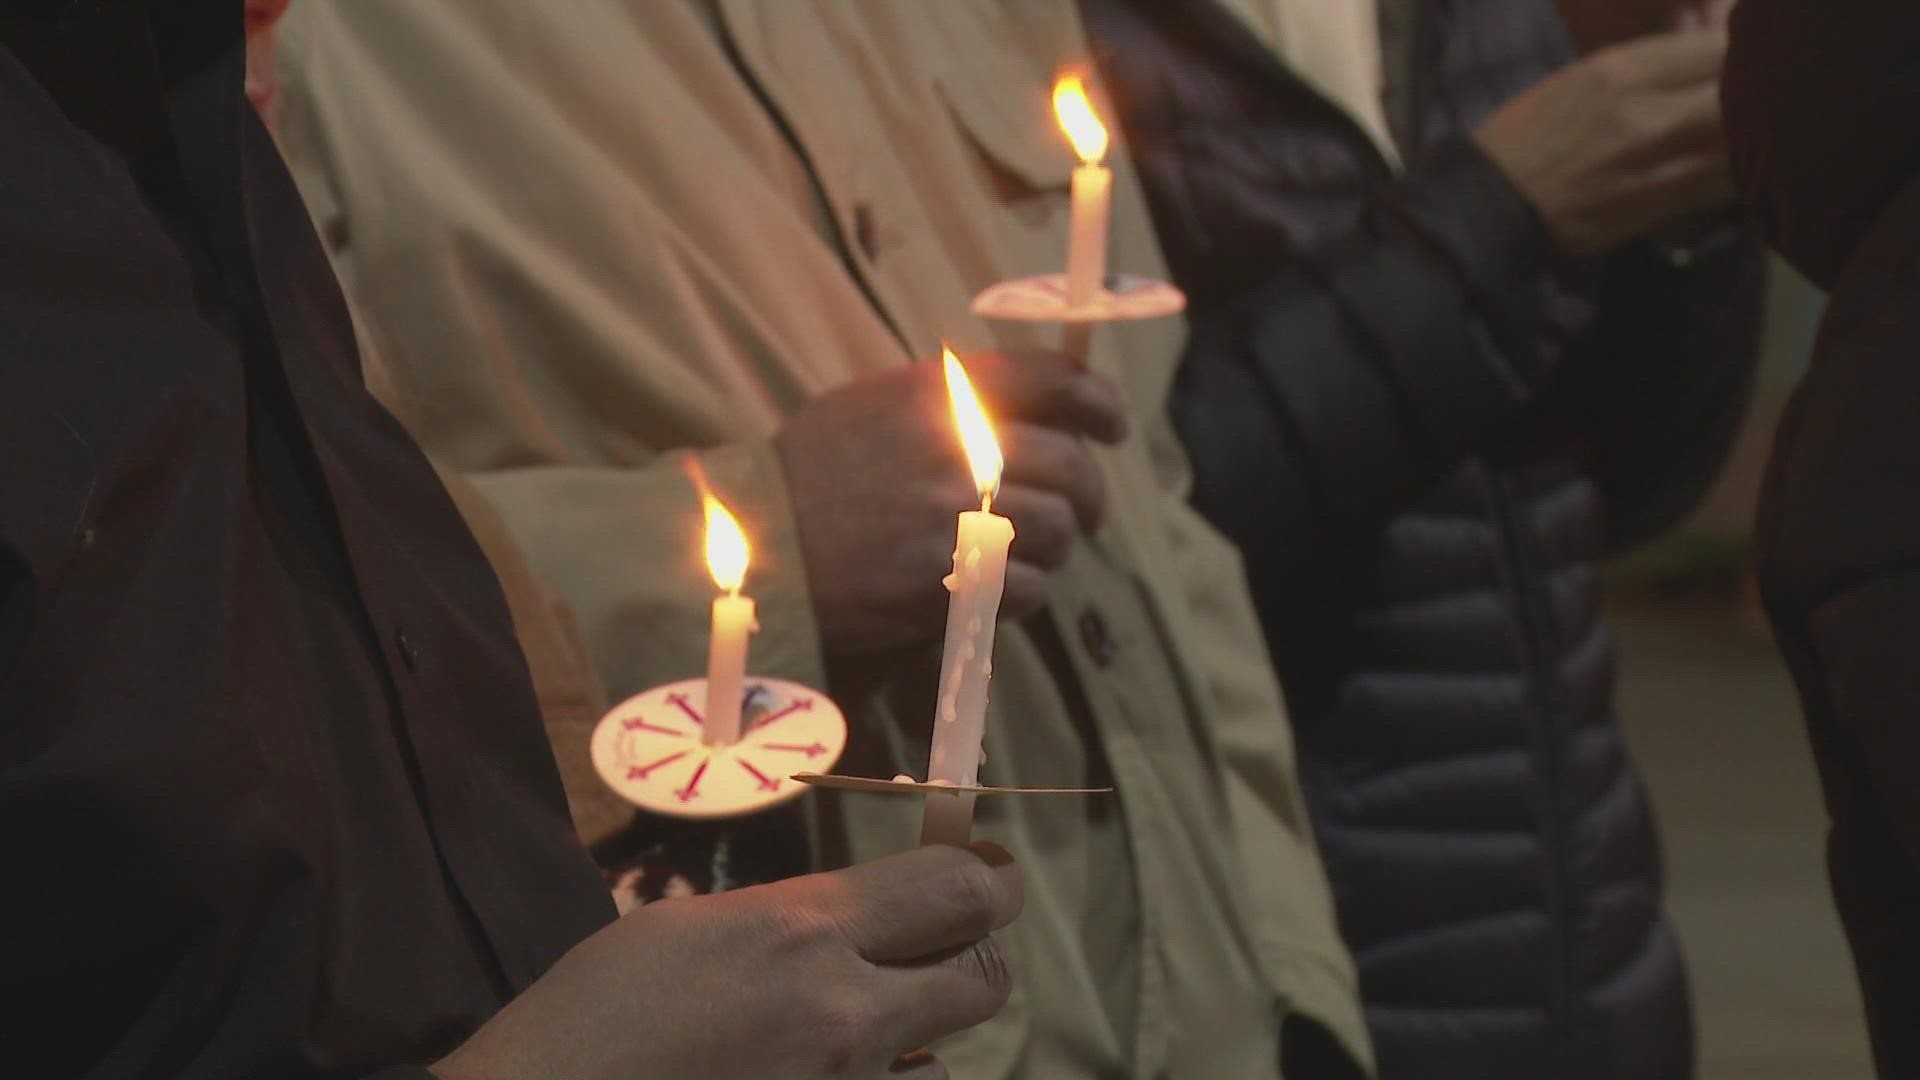 The Greensboro Transgender Task Force held a vigil for those lost to anti-trans violence Sunday.